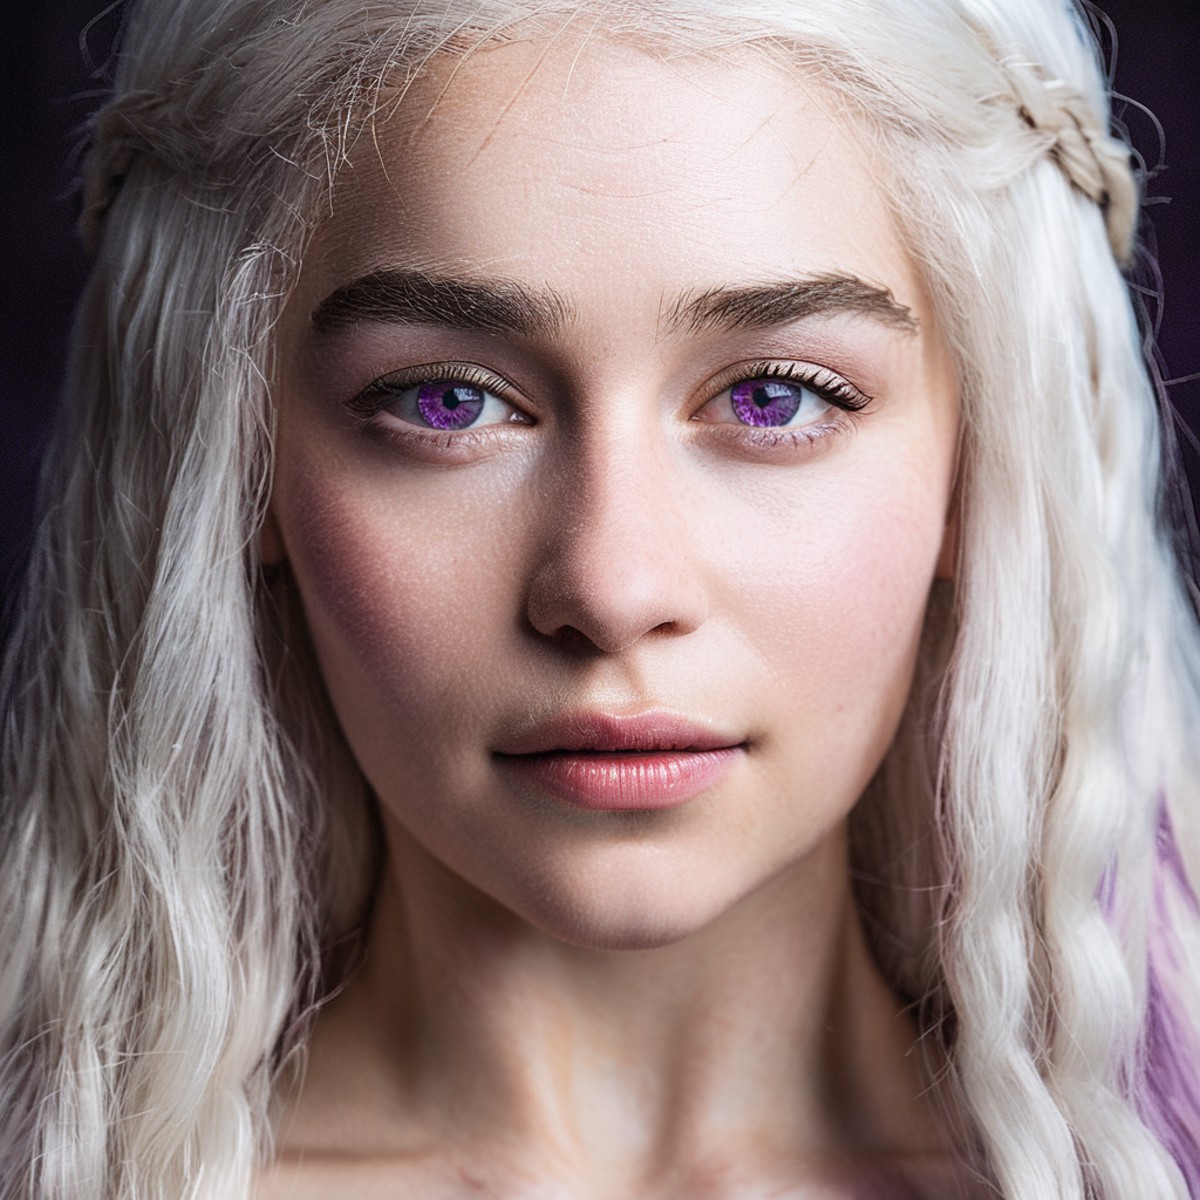 Skin texture, Closeup portrait face photo of a young woman with violet eyes dressed as a targaryen from game of thrones,pl...